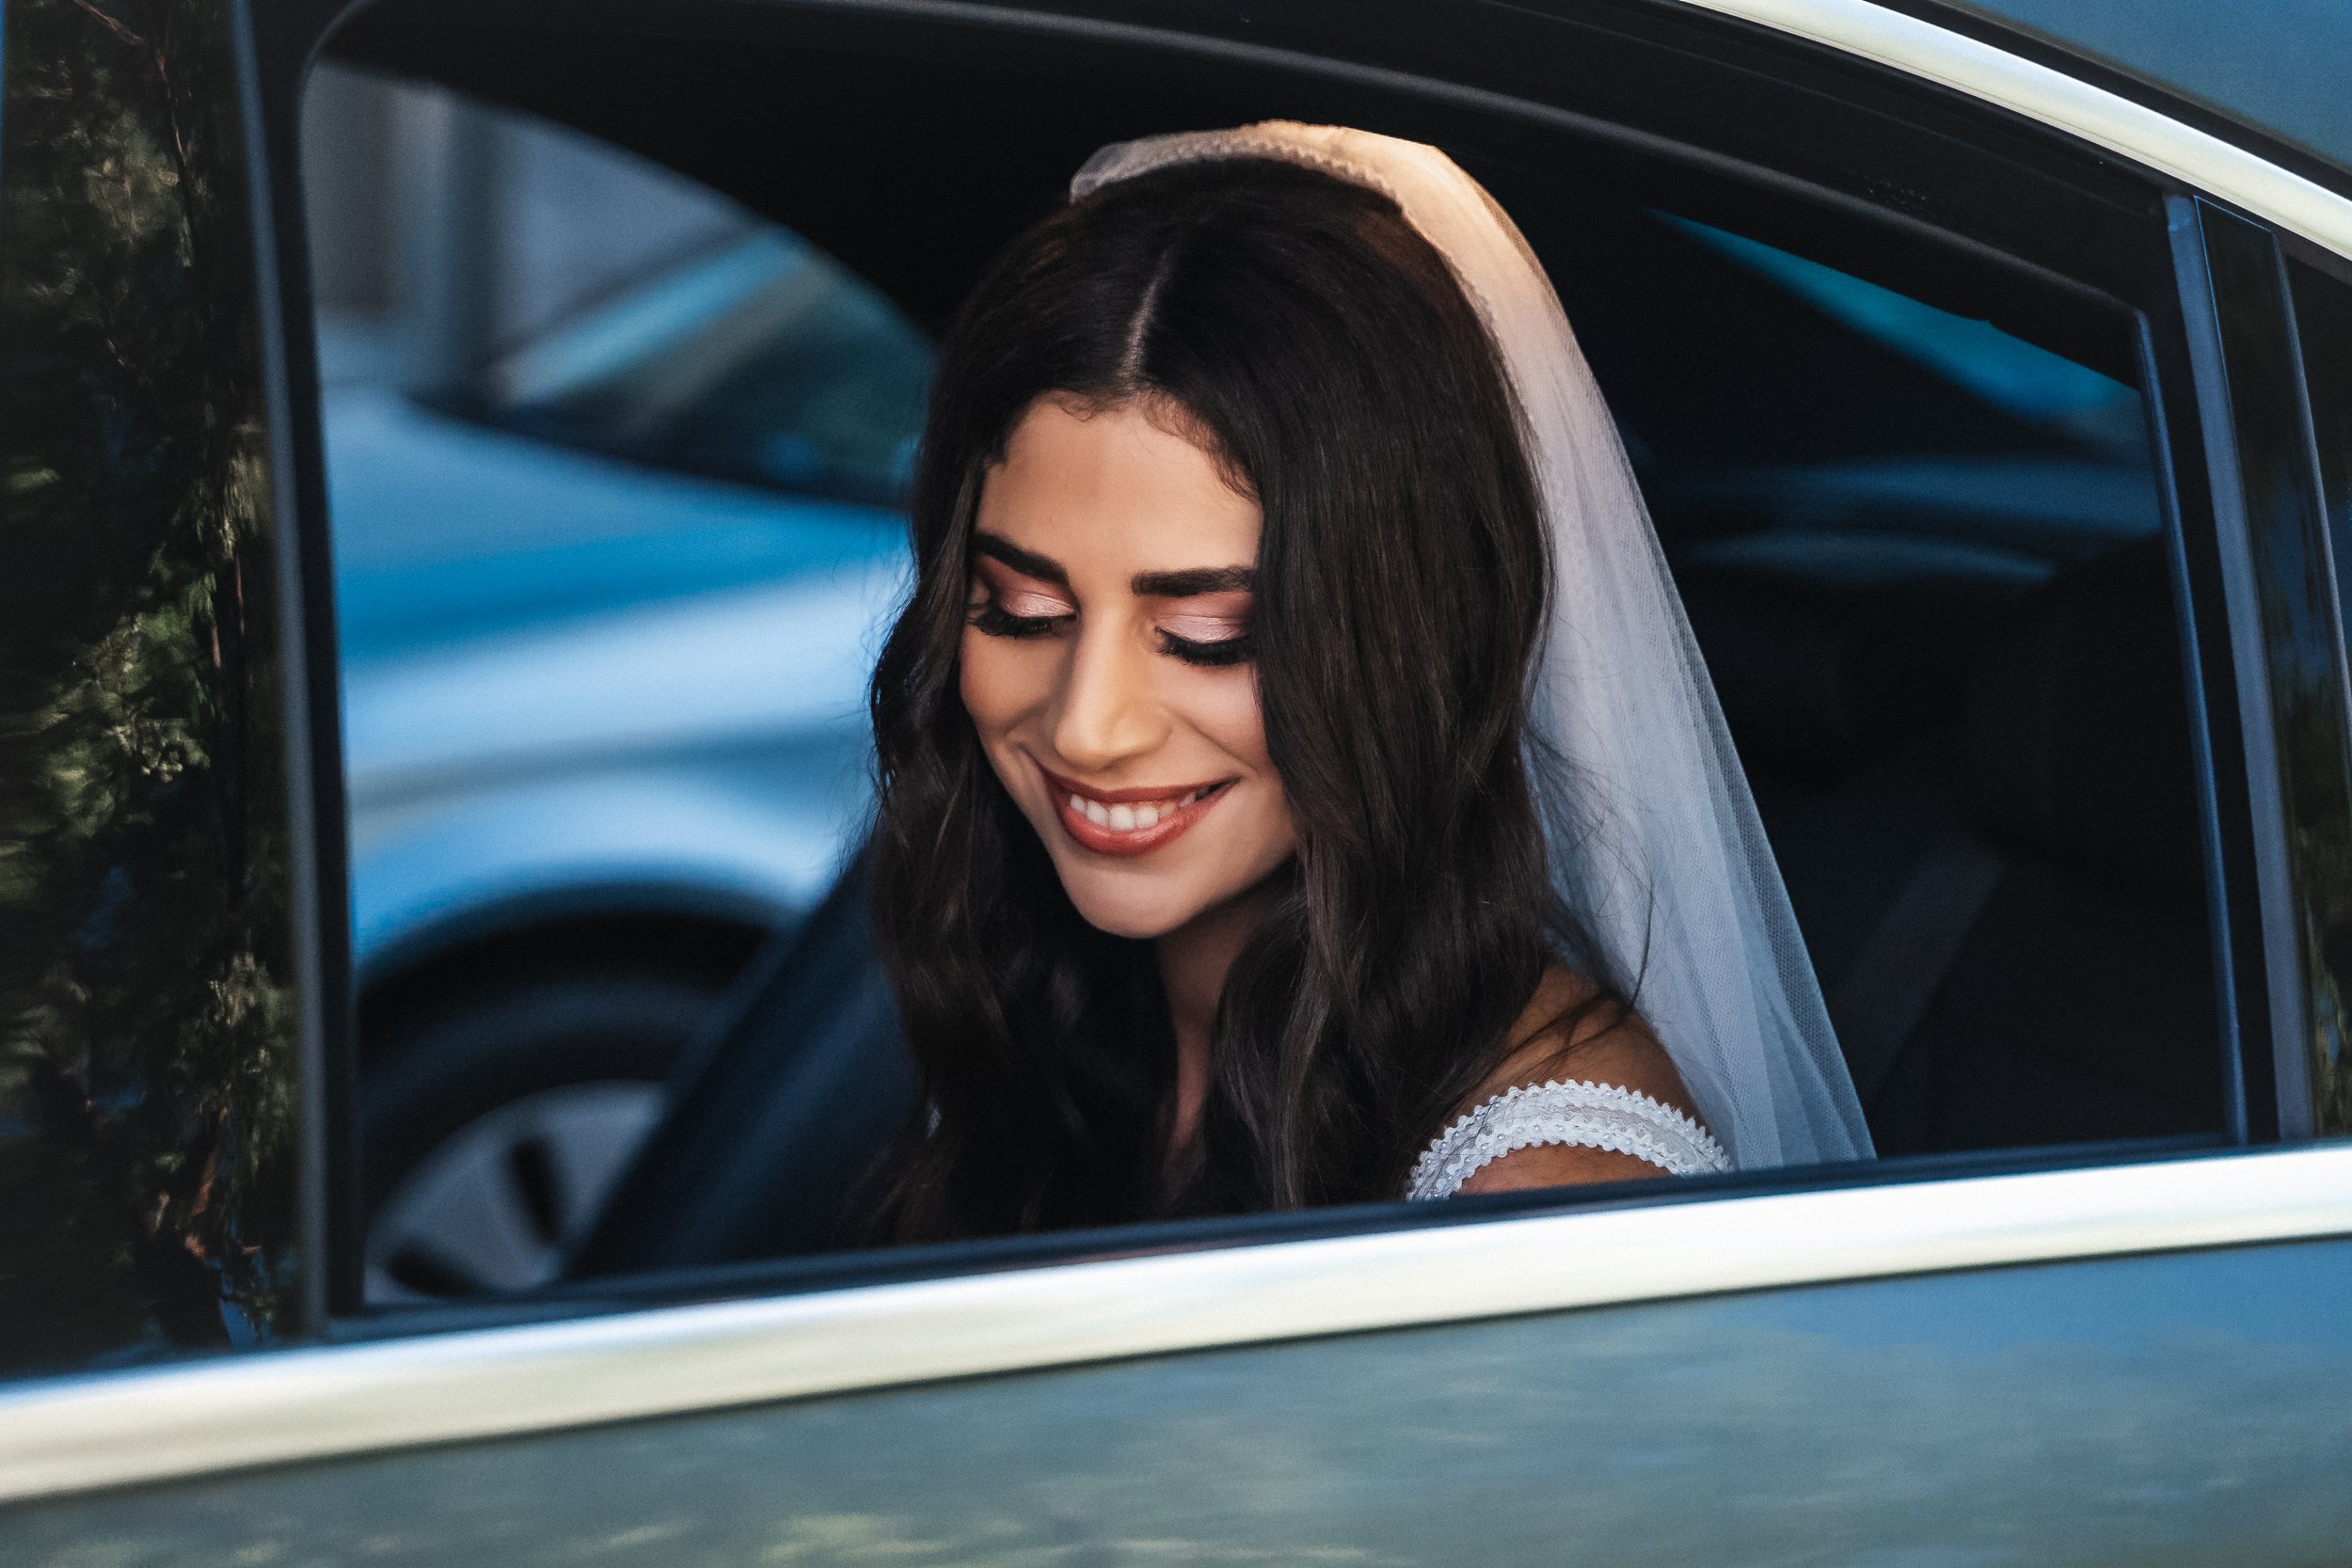  The newlyweds' love was the focus of every photo, taken by the talented photographer amidst the breathtaking beauty of Cyprus.